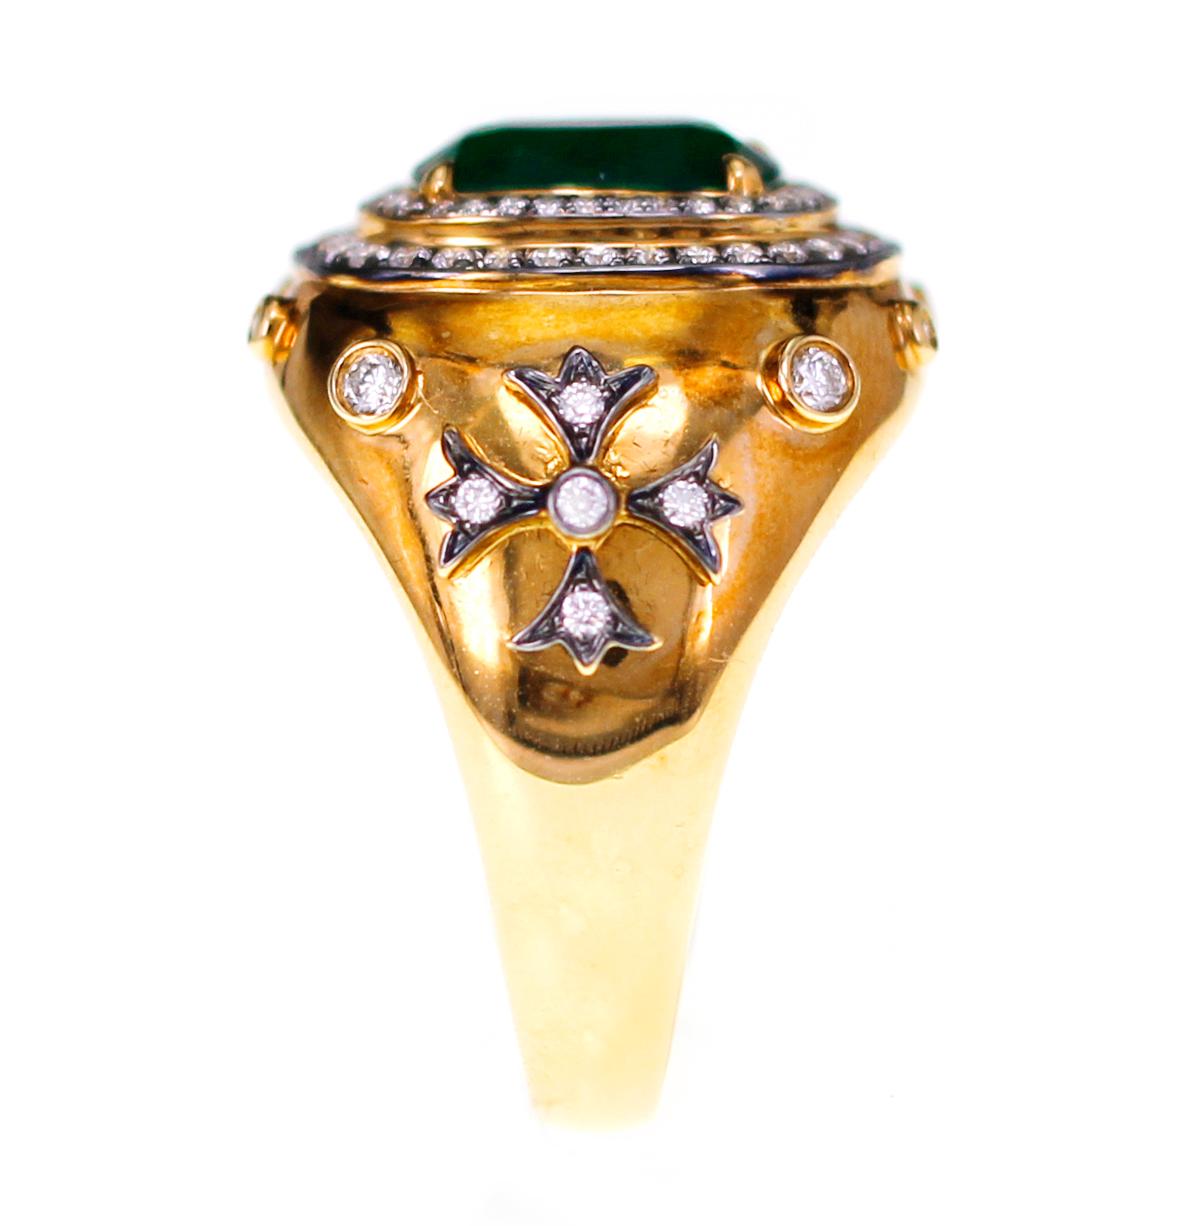 Women's or Men's 3.19 Carat Vivid Green Zambian Emerald in Antique Style Bridal Ring For Sale